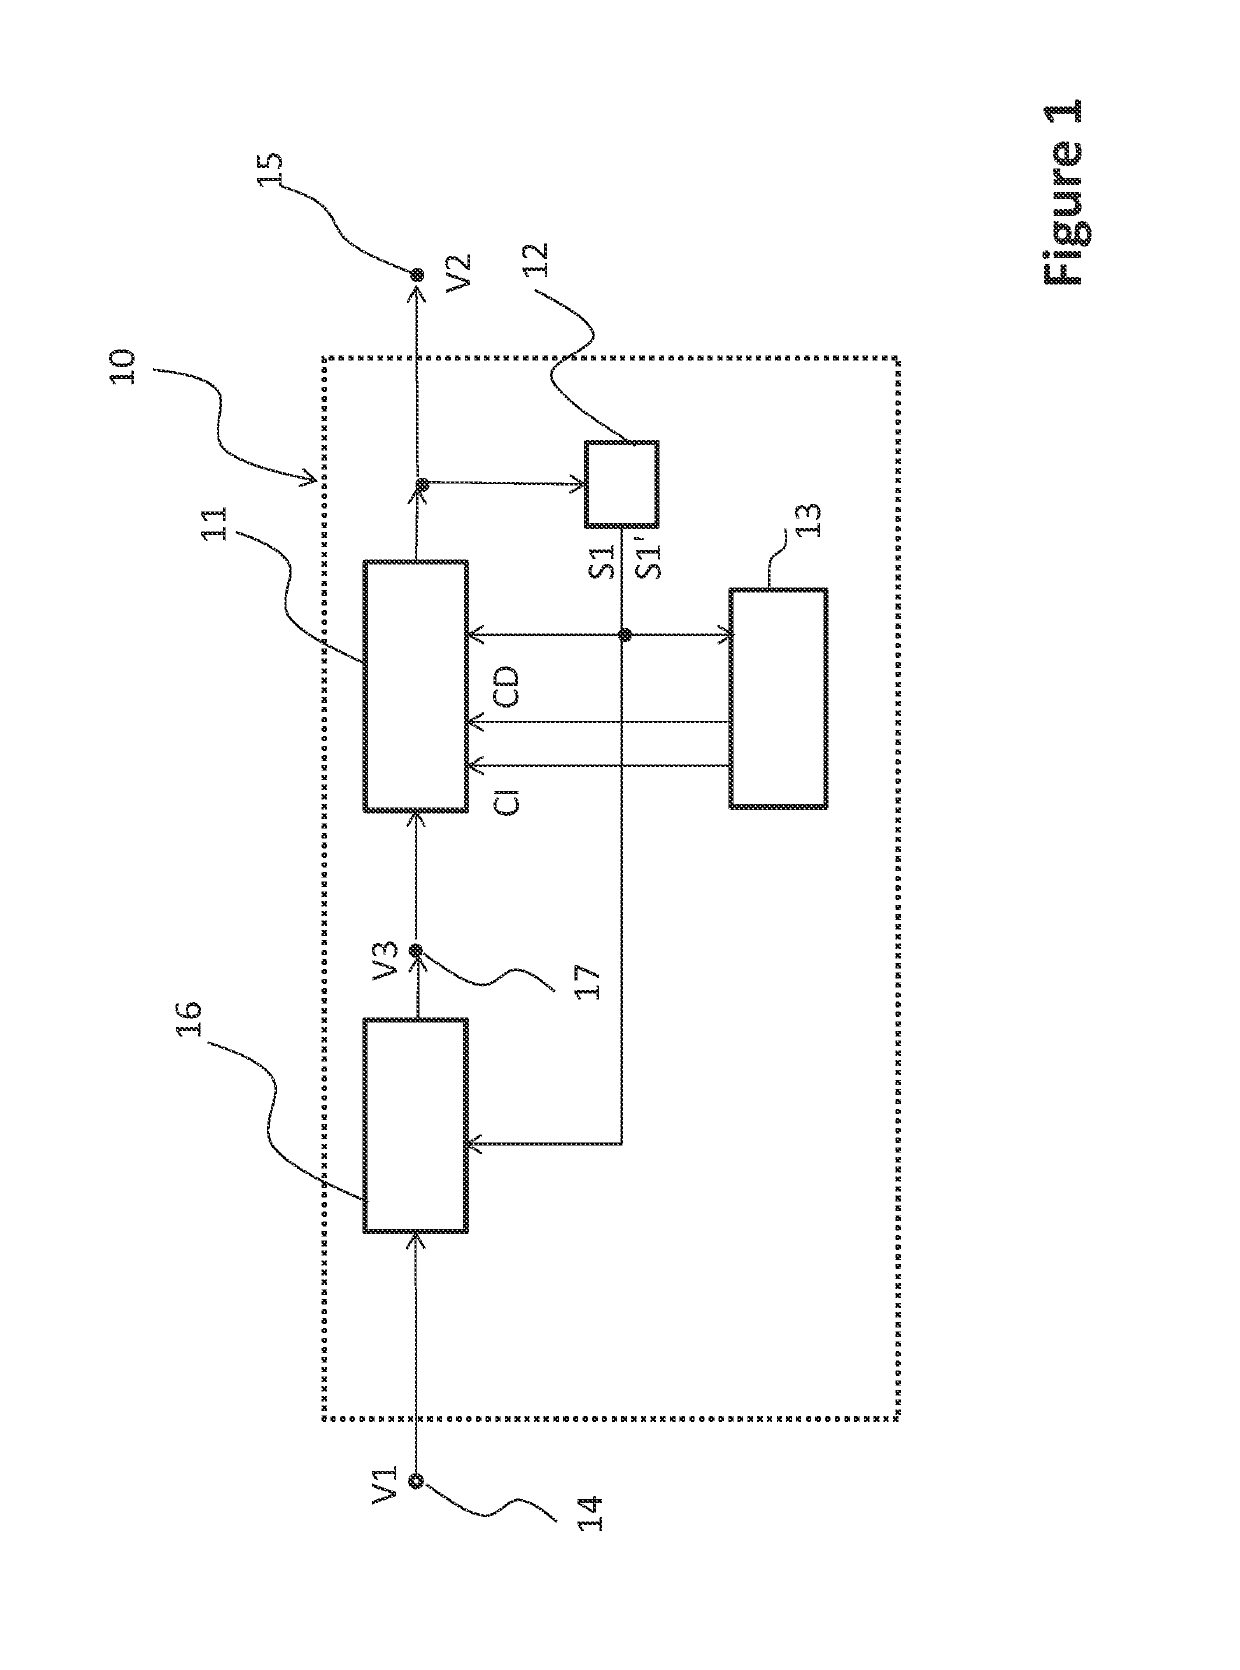 Integrated calibration circuit and a method for calibration of a filter circuit